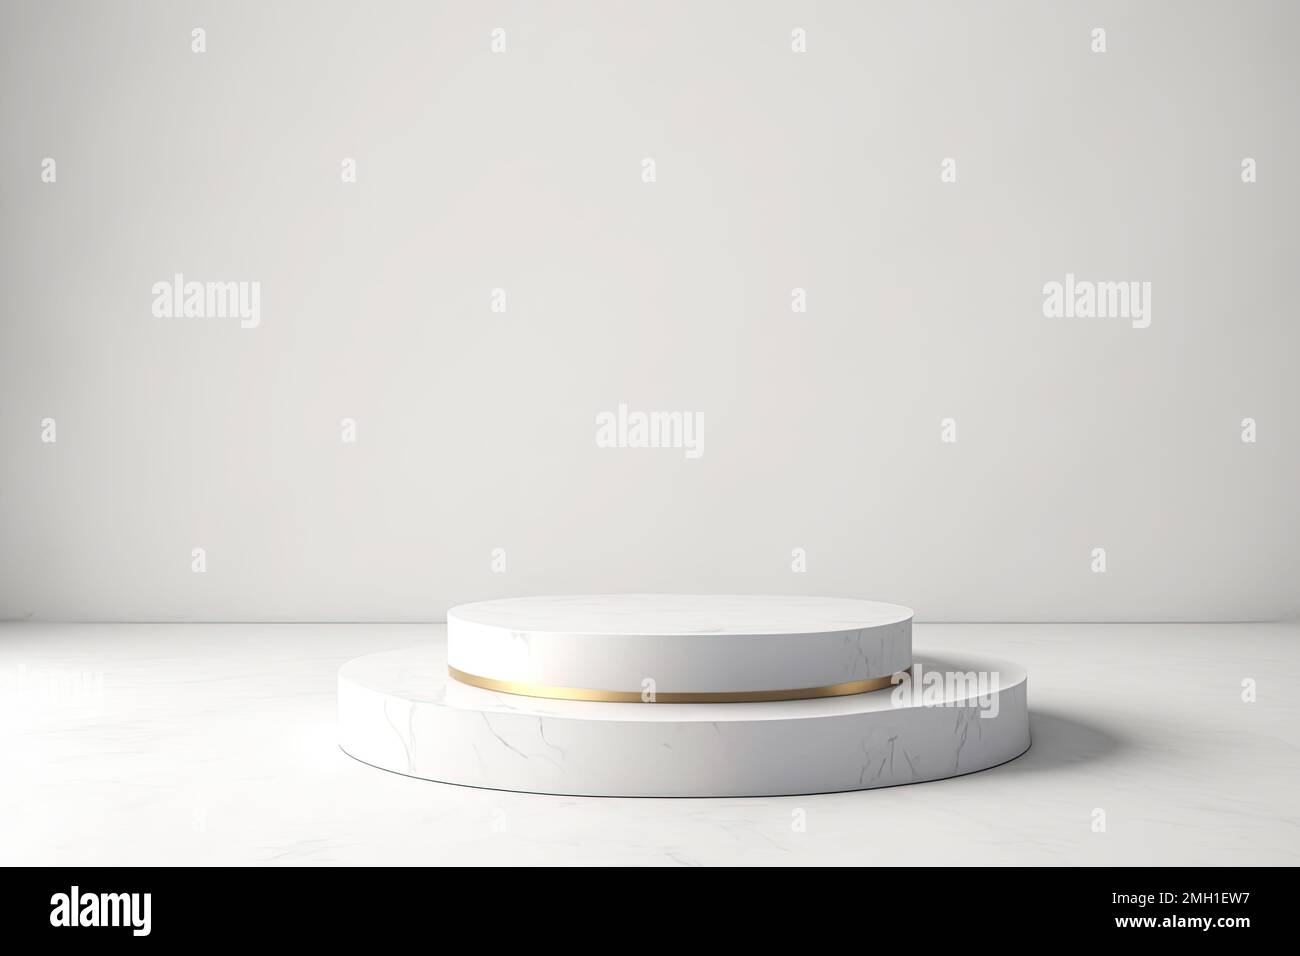 Abstract minimal scene with geometric forms. cylinder marble podium. product presentation. podium, stage pedestal or platform. 3d rendering Stock Photo